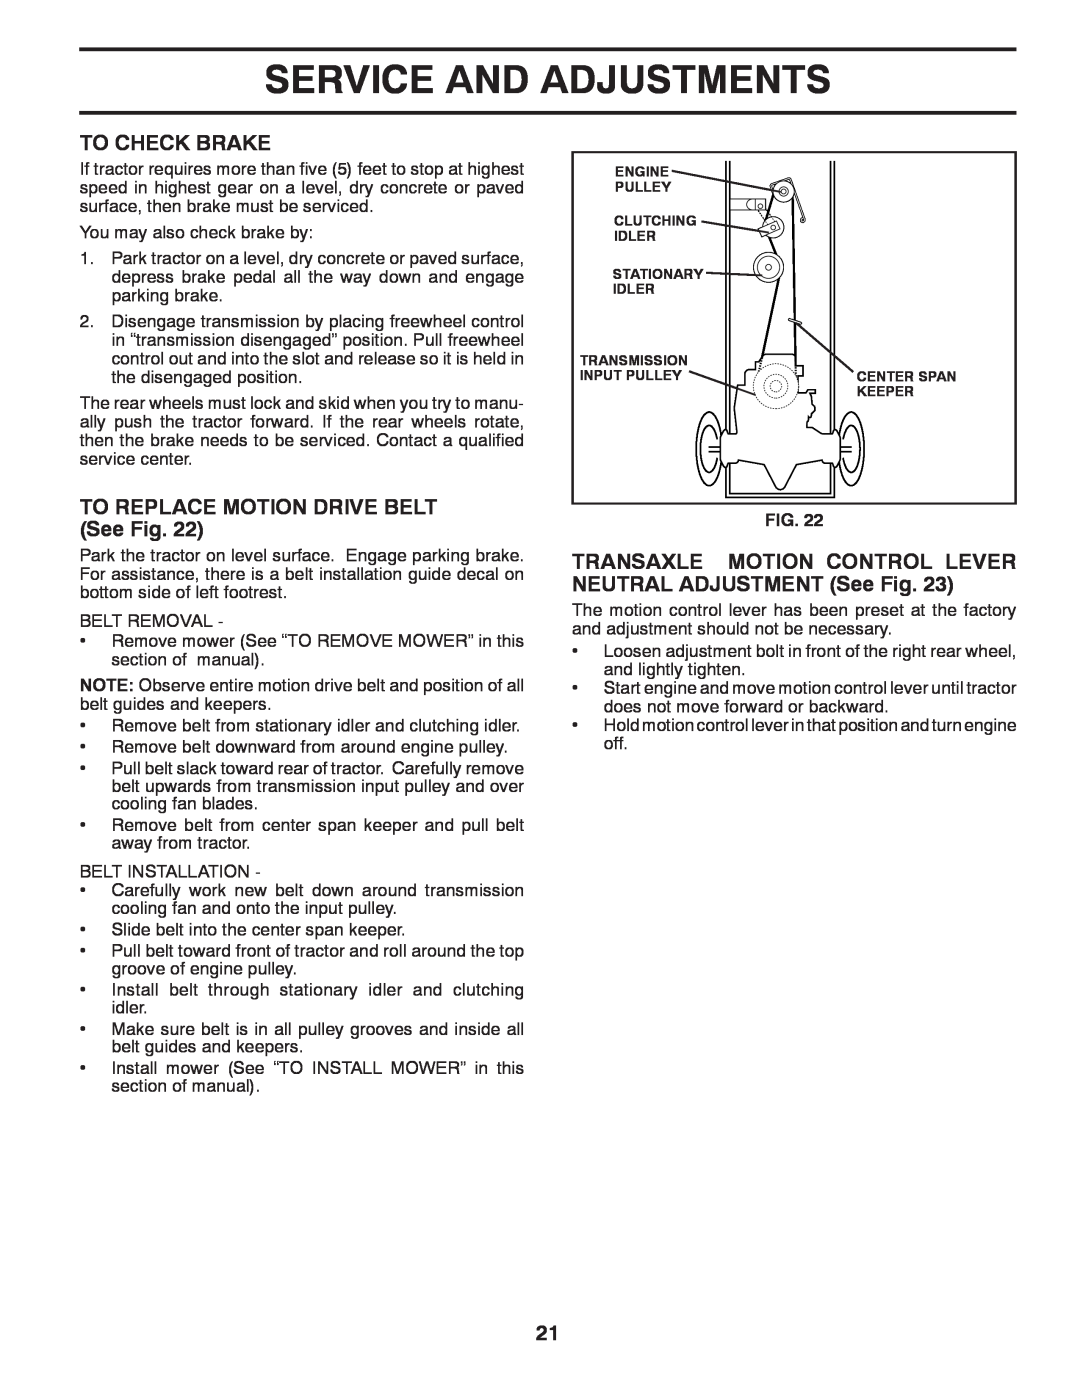 Poulan 419450 To Check Brake, TO REPLACE MOTION DRIVE BELT See Fig, Service And Adjustments, Transmission, Input Pulley 